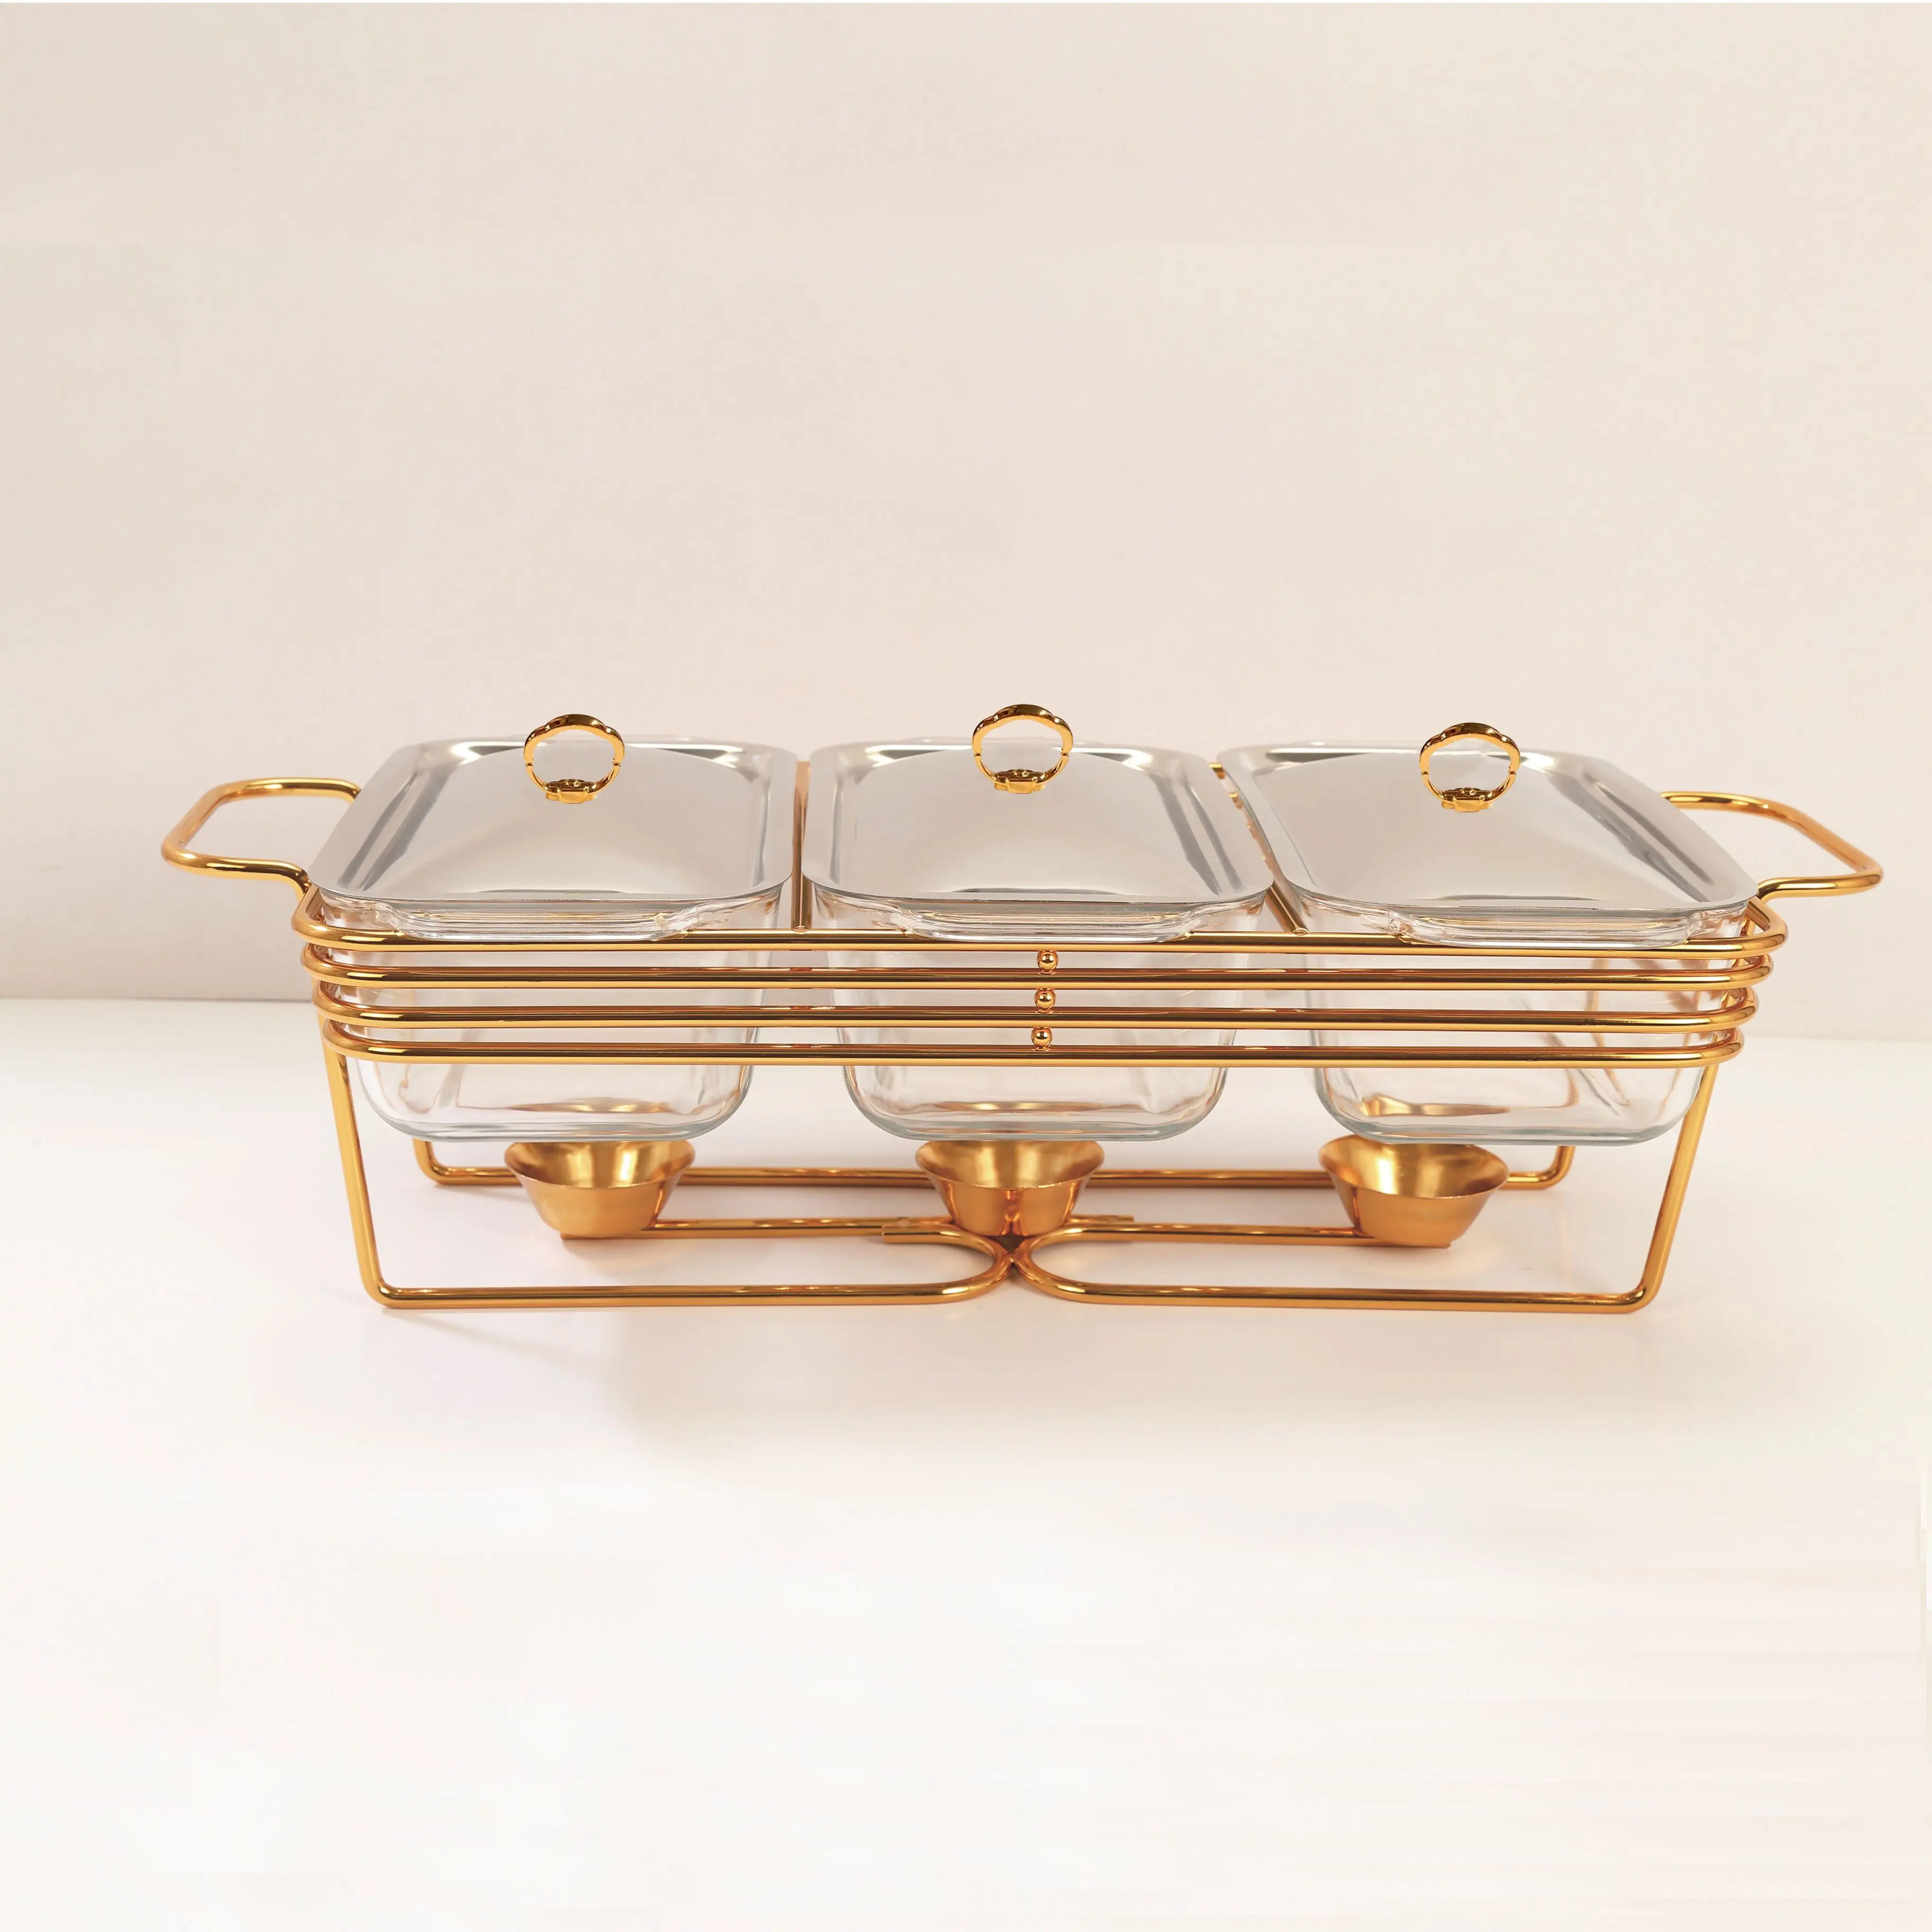 Smooth and easy to clean chafing dish set buffet chafing dishes and warmers for sale